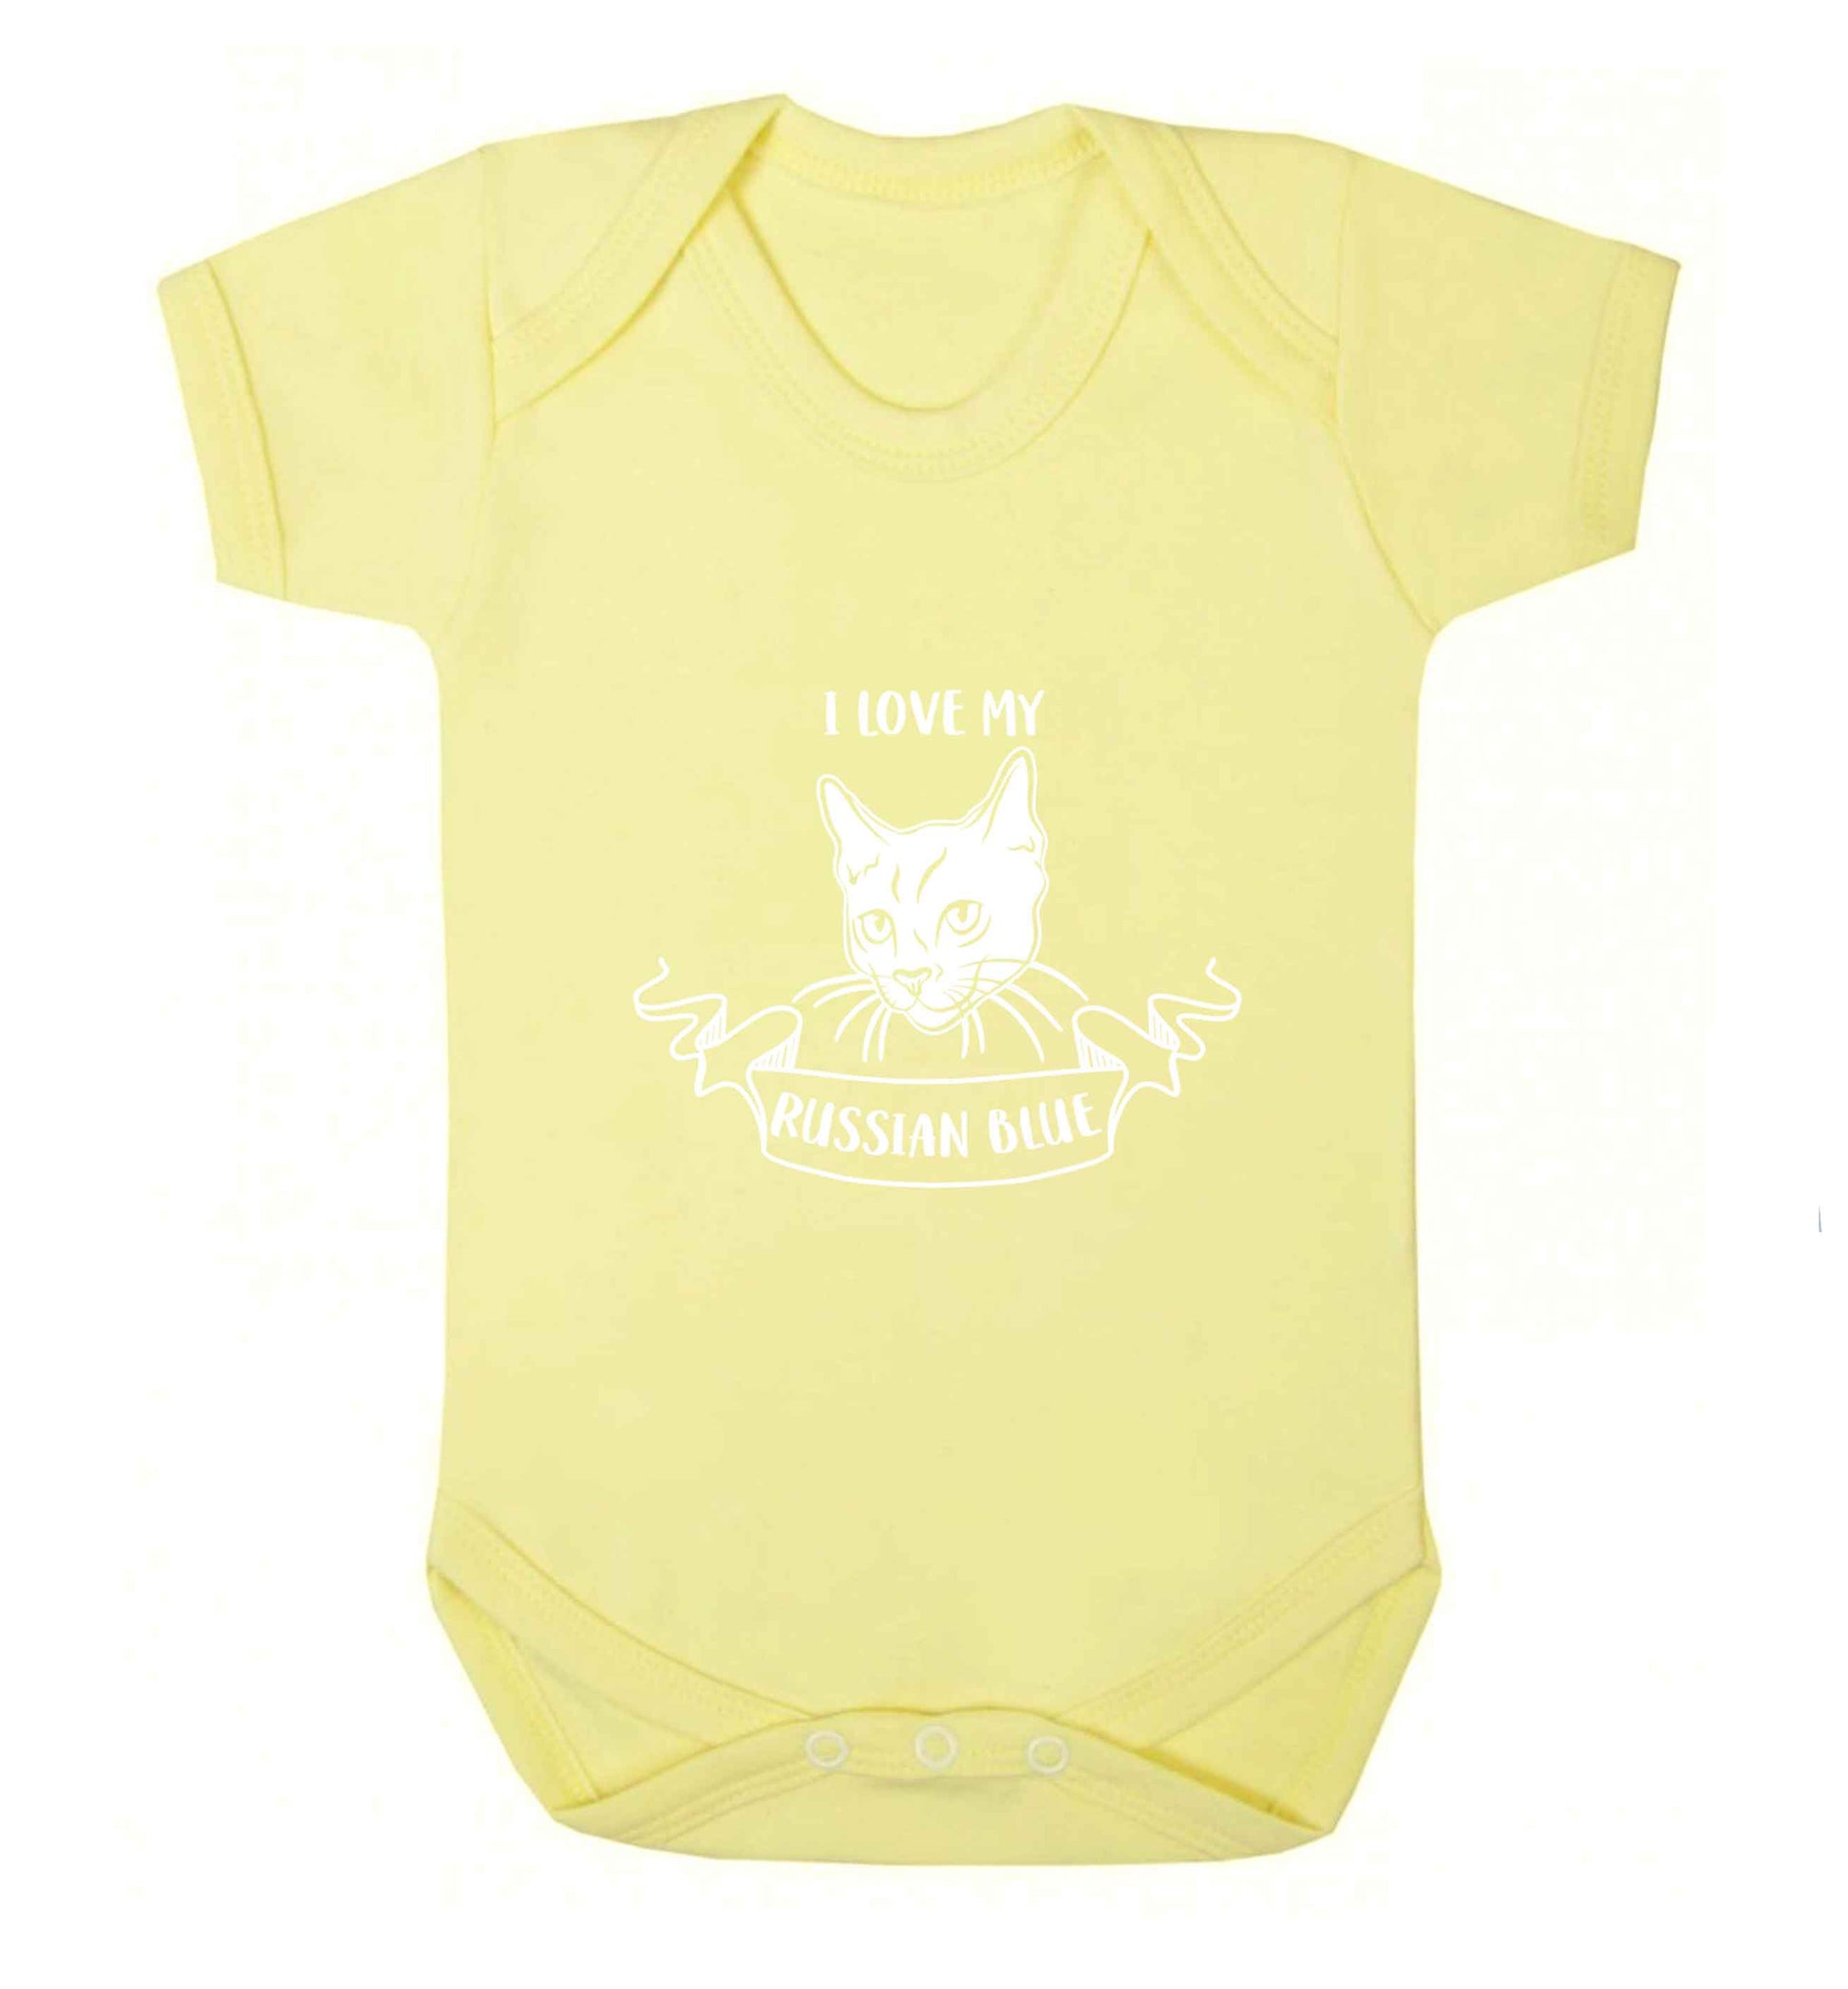 I love my russian blue baby vest pale yellow 18-24 months